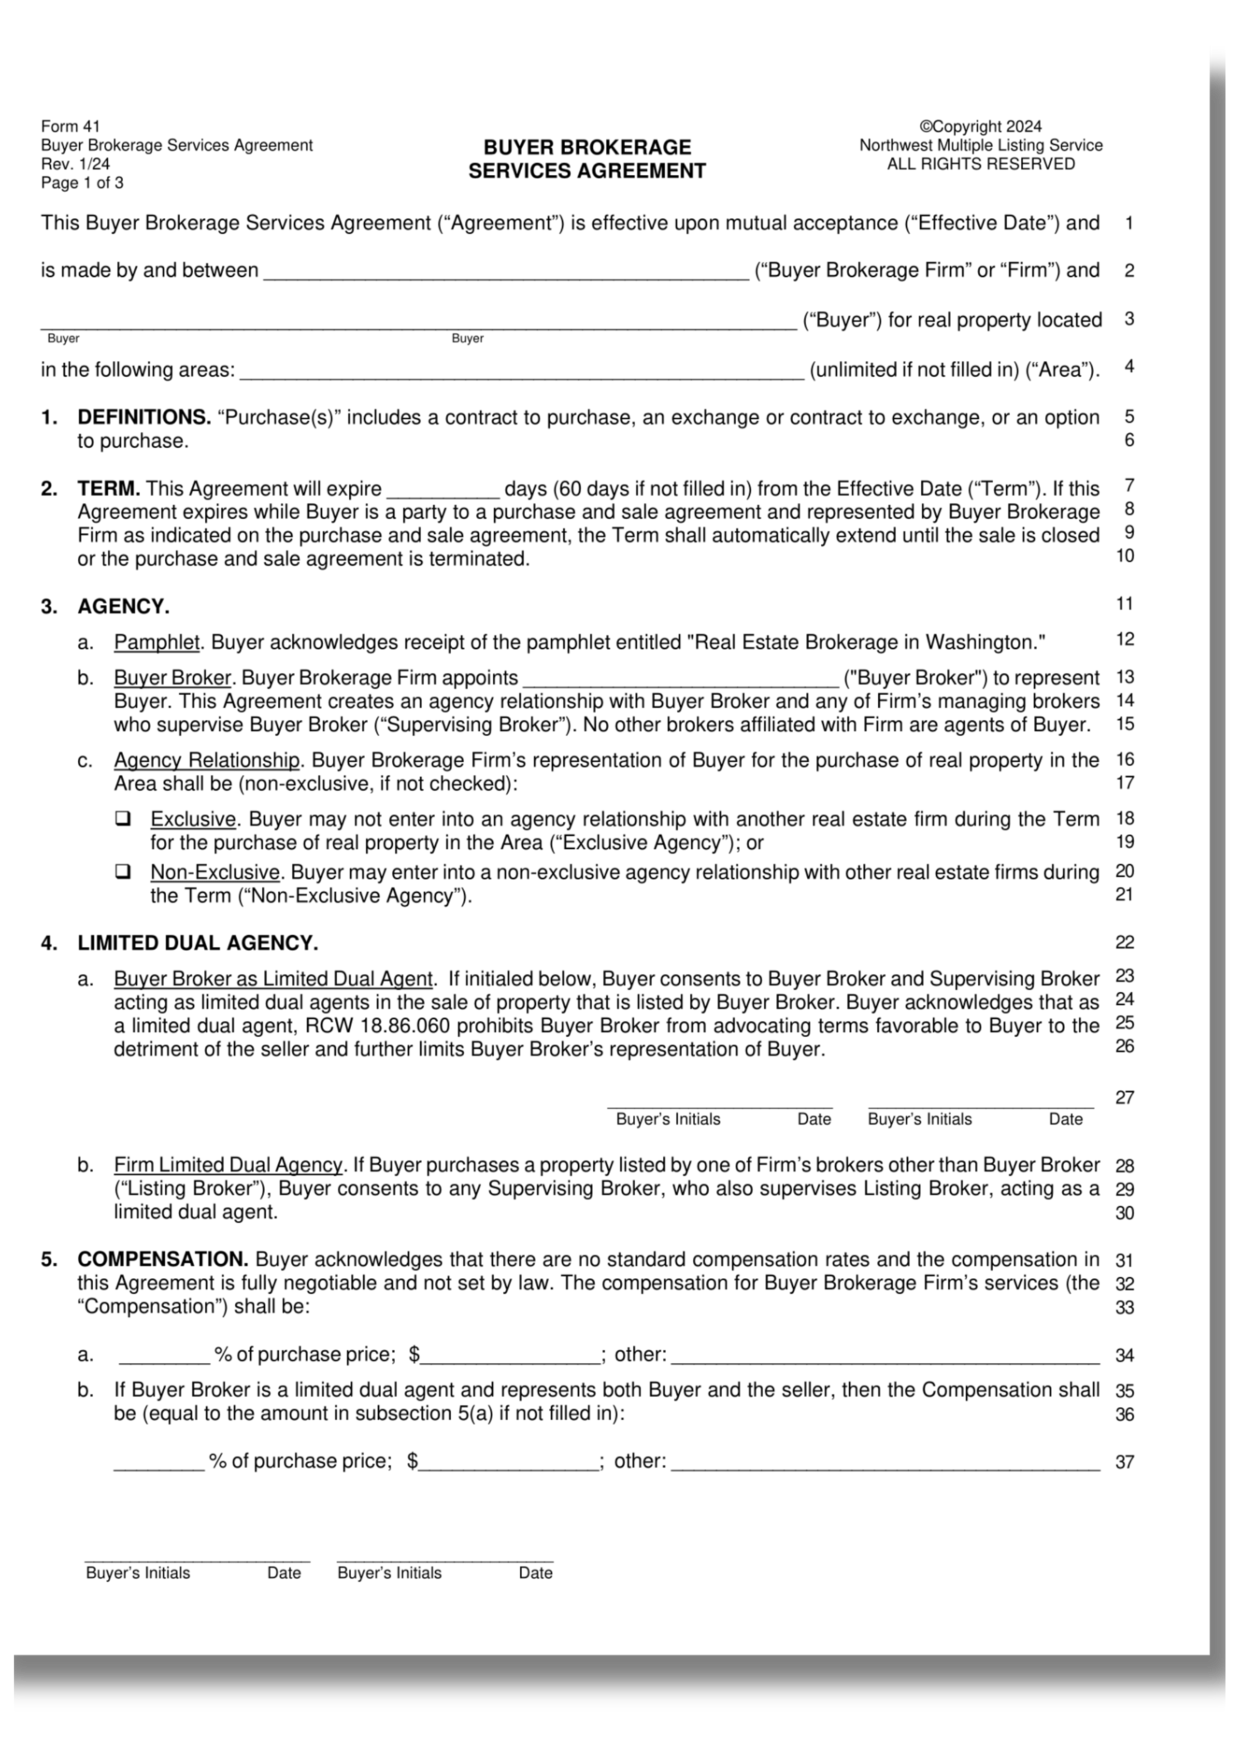 Front page of NWMLS Form 41